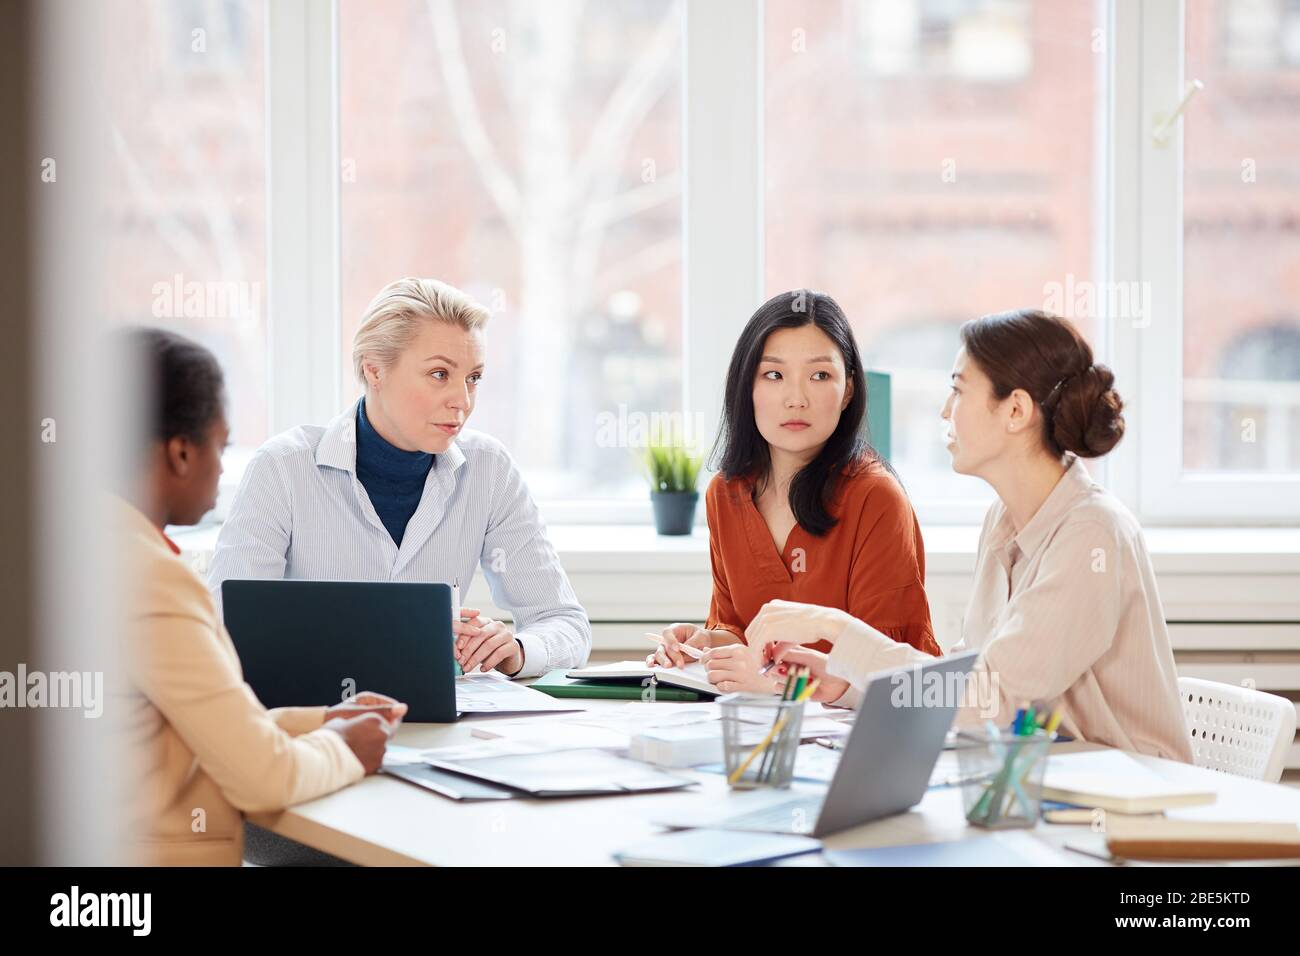 Portrait of diverse female business team discussing project while sitting at table during meeting in conference room against window, copy space Stock Photo